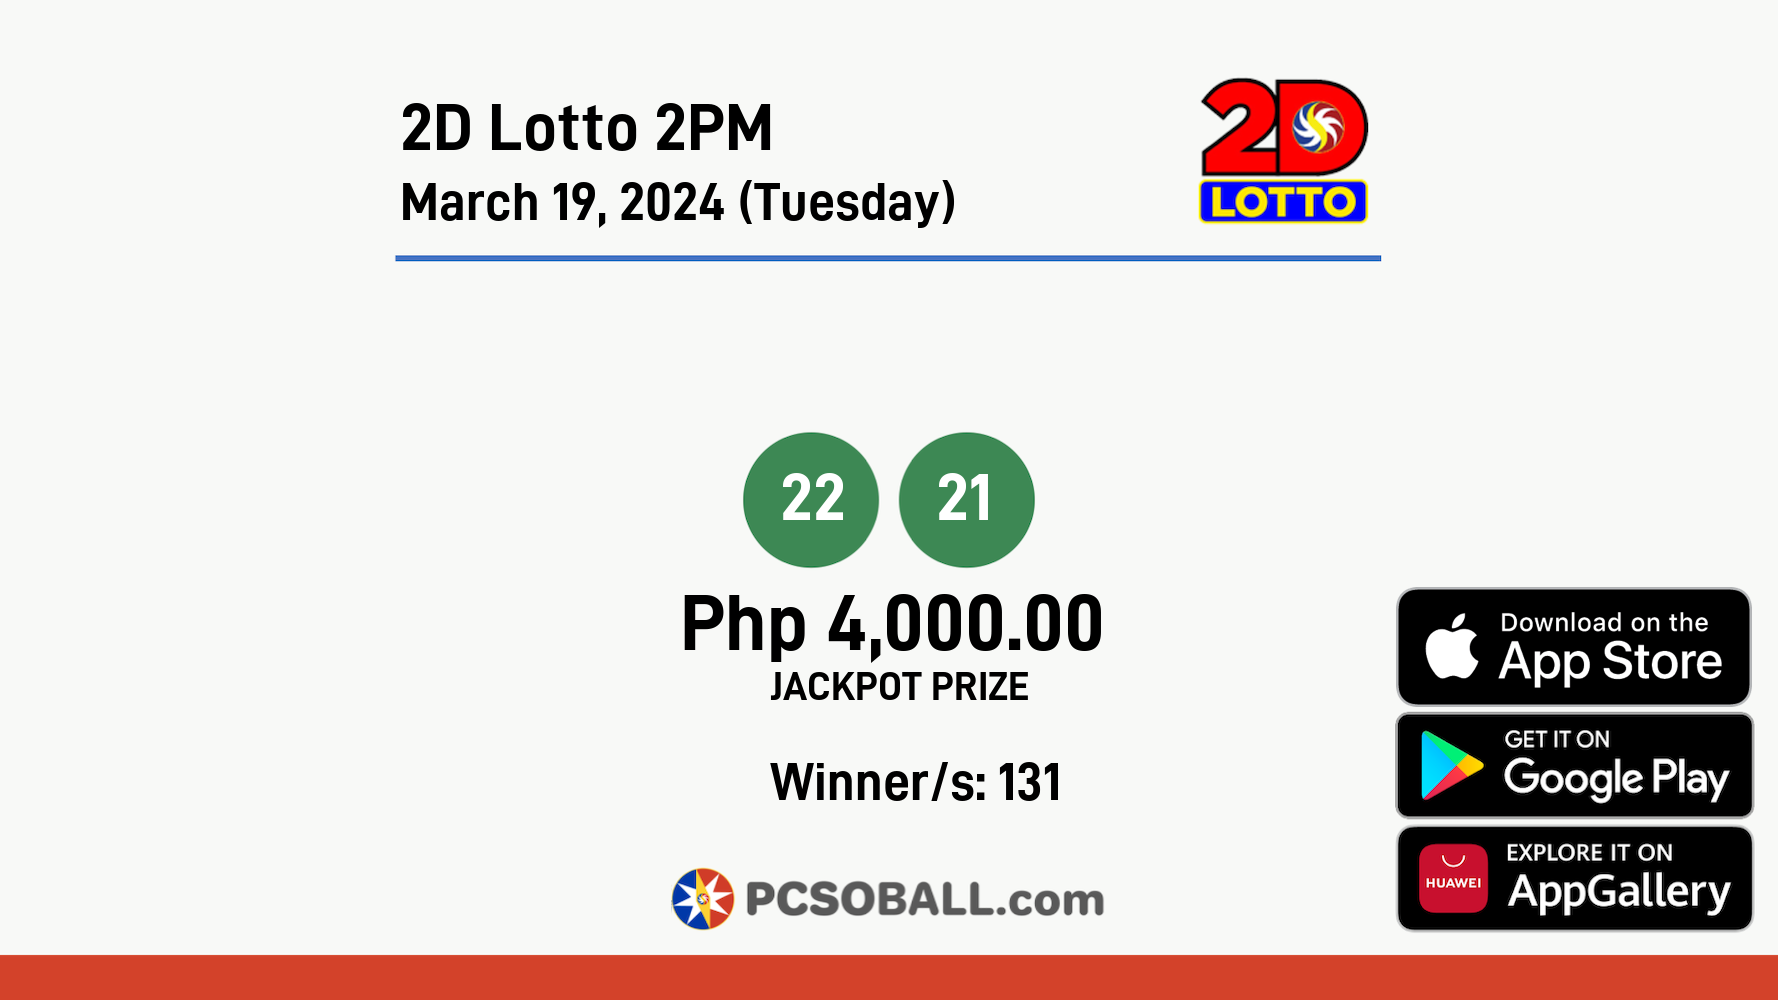 2D Lotto 2PM March 19, 2024 (Tuesday) Result